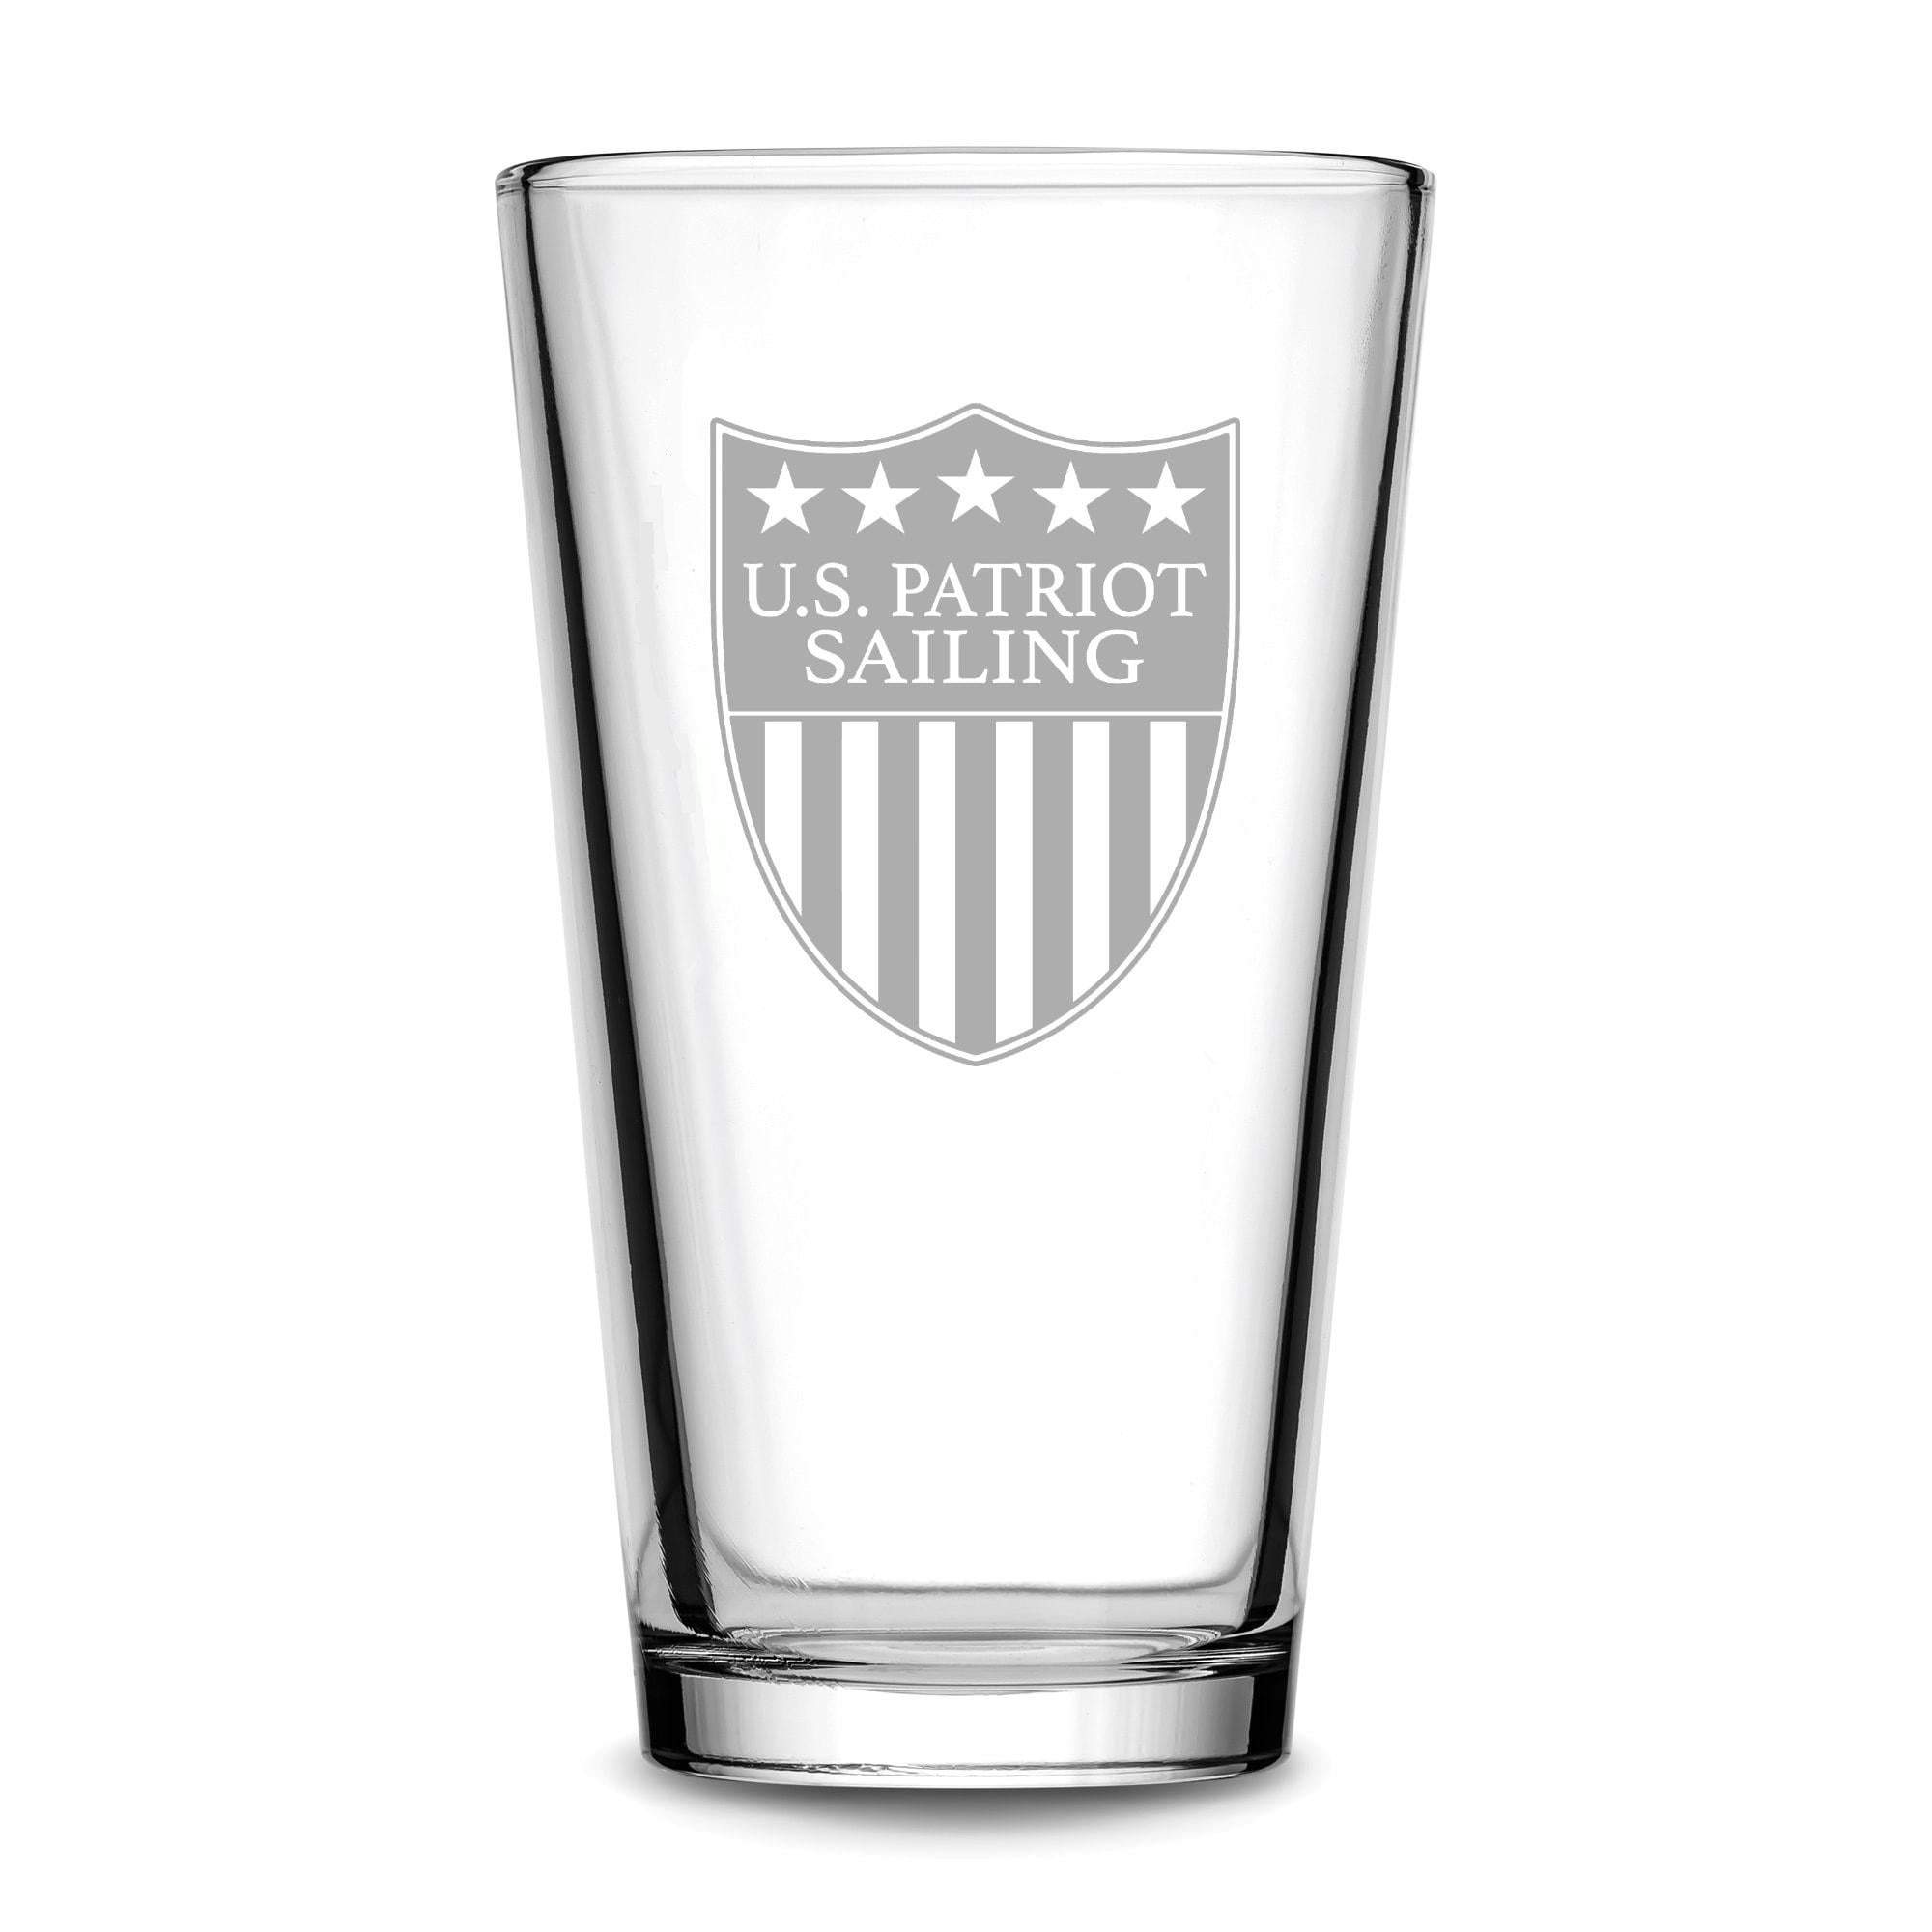 Premium US Patriot Sailing Pint Glass, 15.3oz Deep Etched Beer Glass, Made in USA by Integrity Bottles